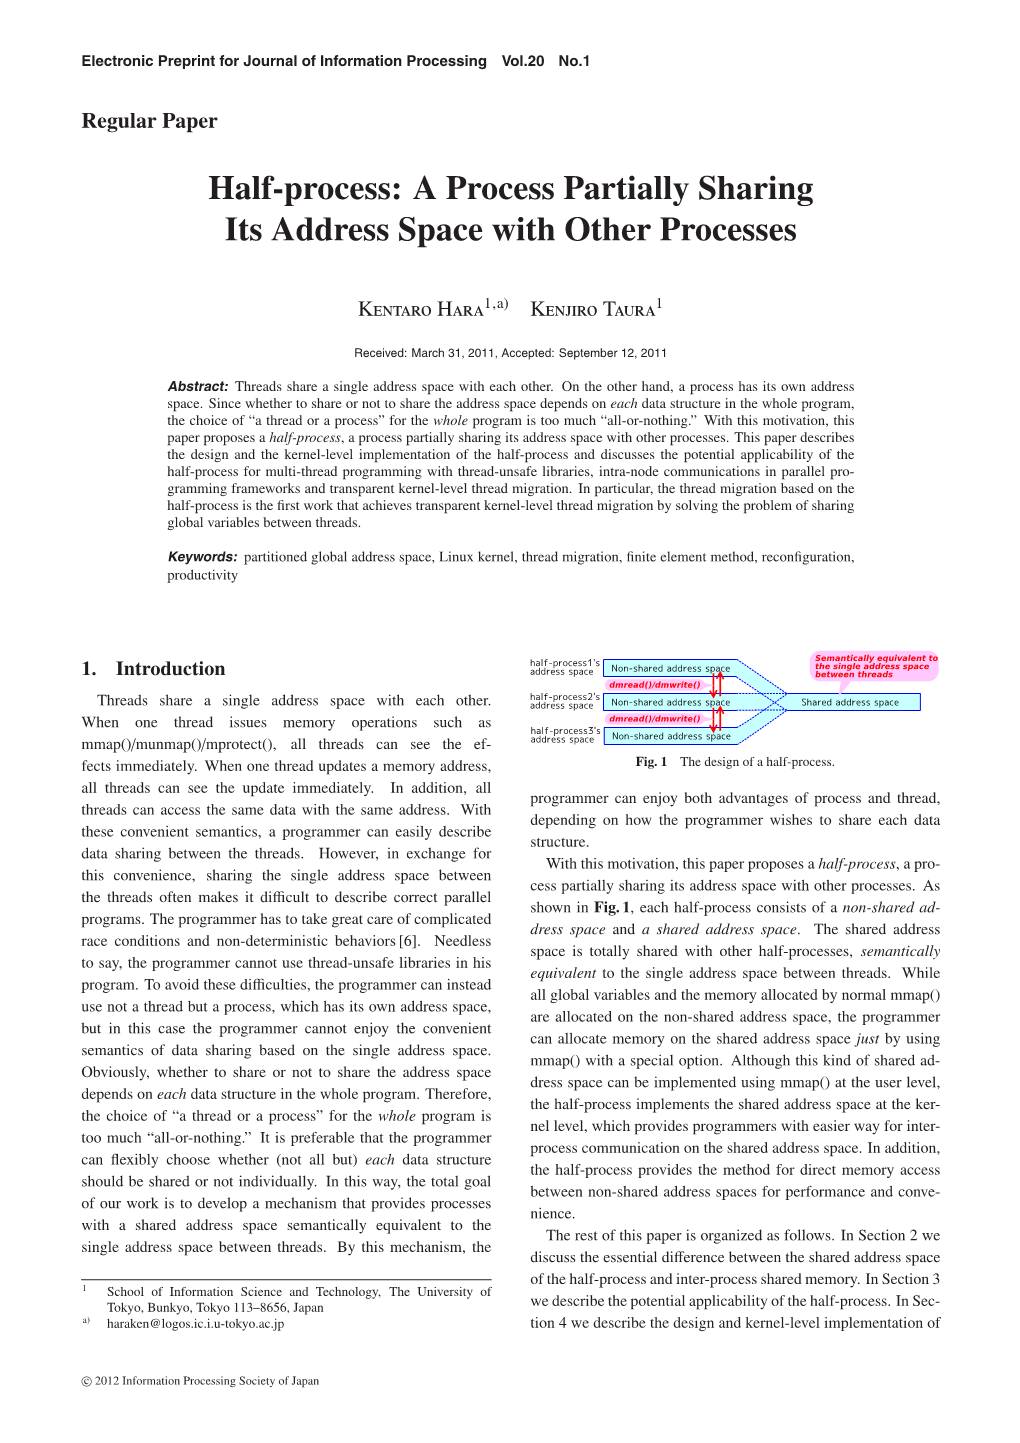 Half-Process: a Process Partially Sharing Its Address Space with Other Processes